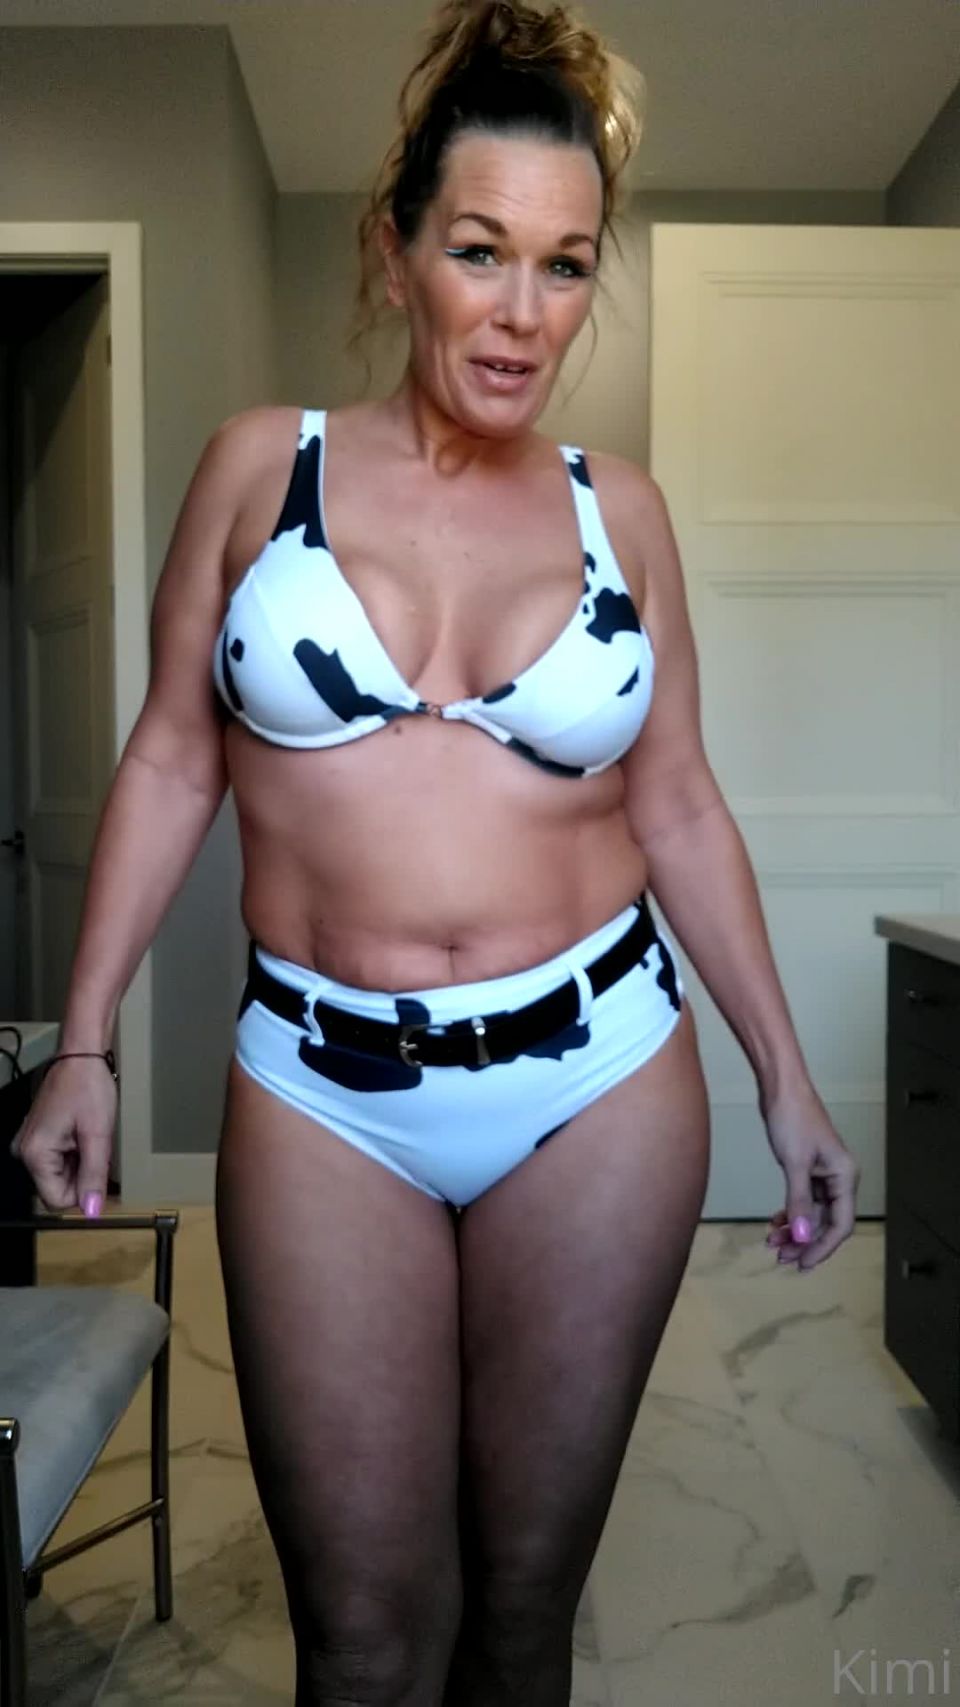 Kimi the Milf Mommy () Kimithemilfmommy - its your lucky day all of you are in first video drop will be friday stay tuned 25-05-2021